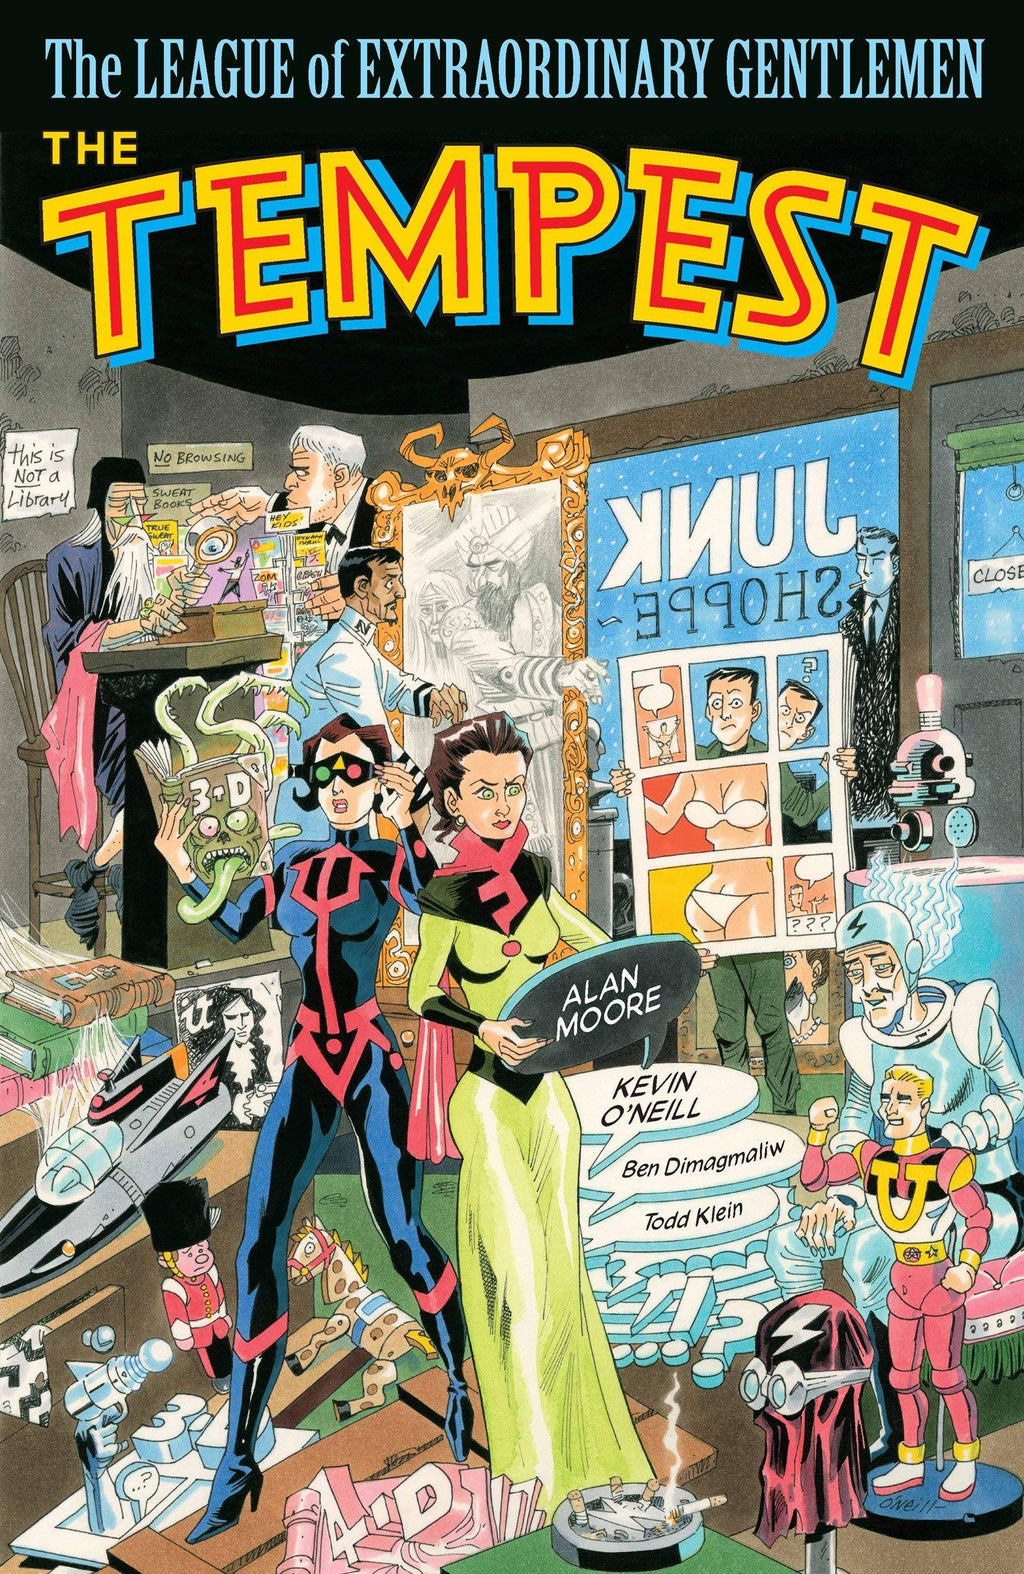 The League Of Extraordinary Gentlemen Volume IV The Tempest - The Comic Warehouse